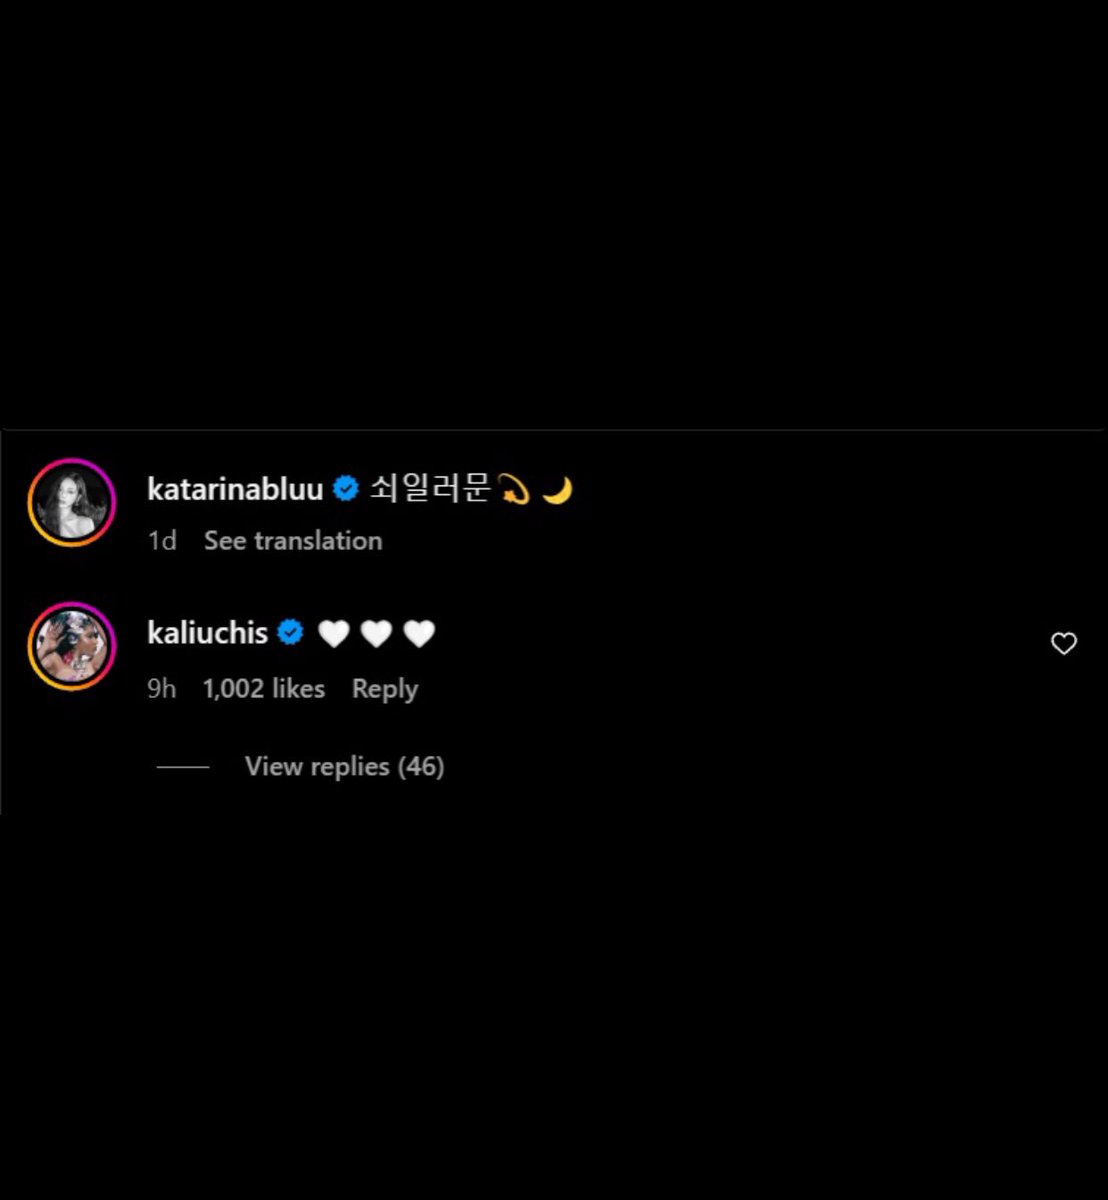 KALI UCHIS LIKED AND COMMENTED ON KARINA NEWEST POST

i’m dreaming about a collaboration 🥺 we love you @KALIUCHIS